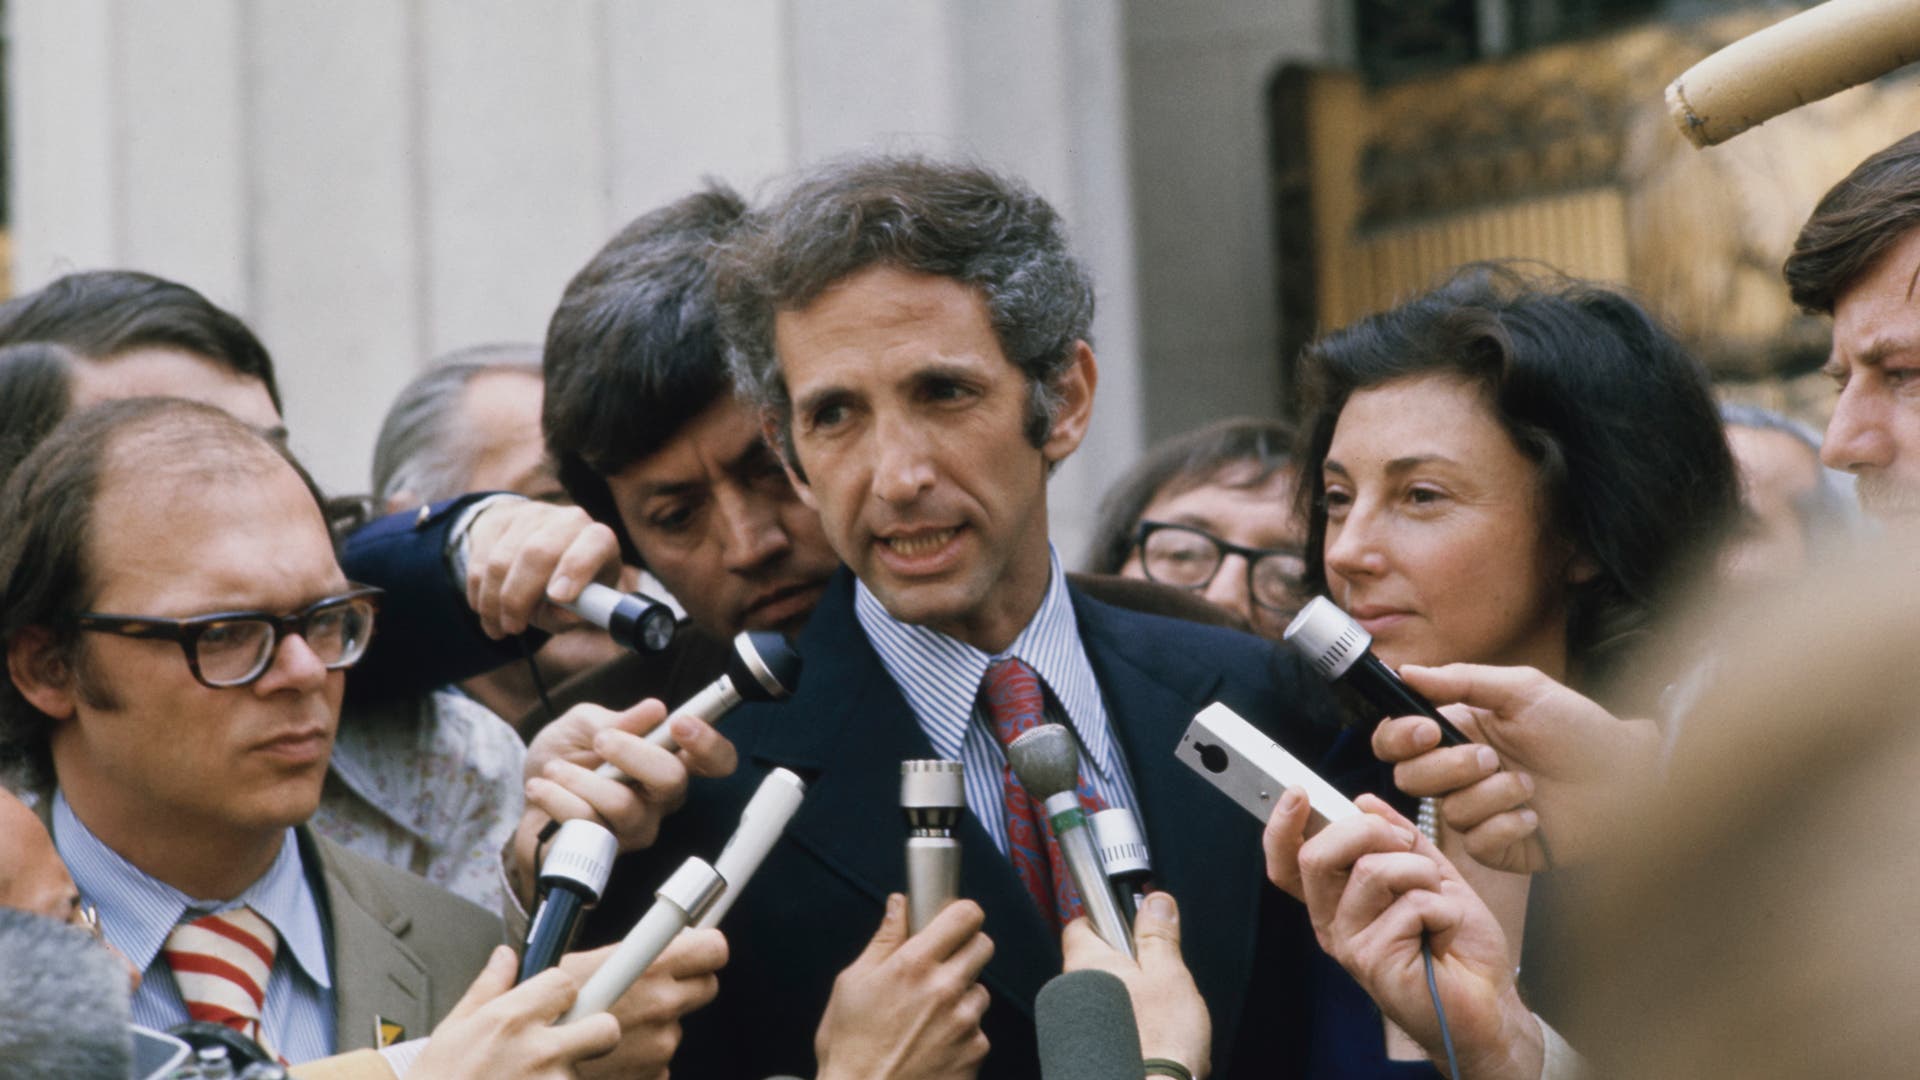 Pentagon Paper Defendant, Federal CourtsAmerican researcher Tony Russo (1936-2008) and American economist and political activist Daniel Ellsberg address the media during a recess in their trial at the Federal Courtroom in Los Angeles, California, 10th May 1973. Russo and Ellsberg stand accused of illegally copying and distributing the Pentagon papers relating to the Vietnam war; it emerged during the trial that the FBI put a wiretap on Ellsberg's telephone conversations in 1969 and 1970. (Photo by Bettmann Archive/Getty Images)